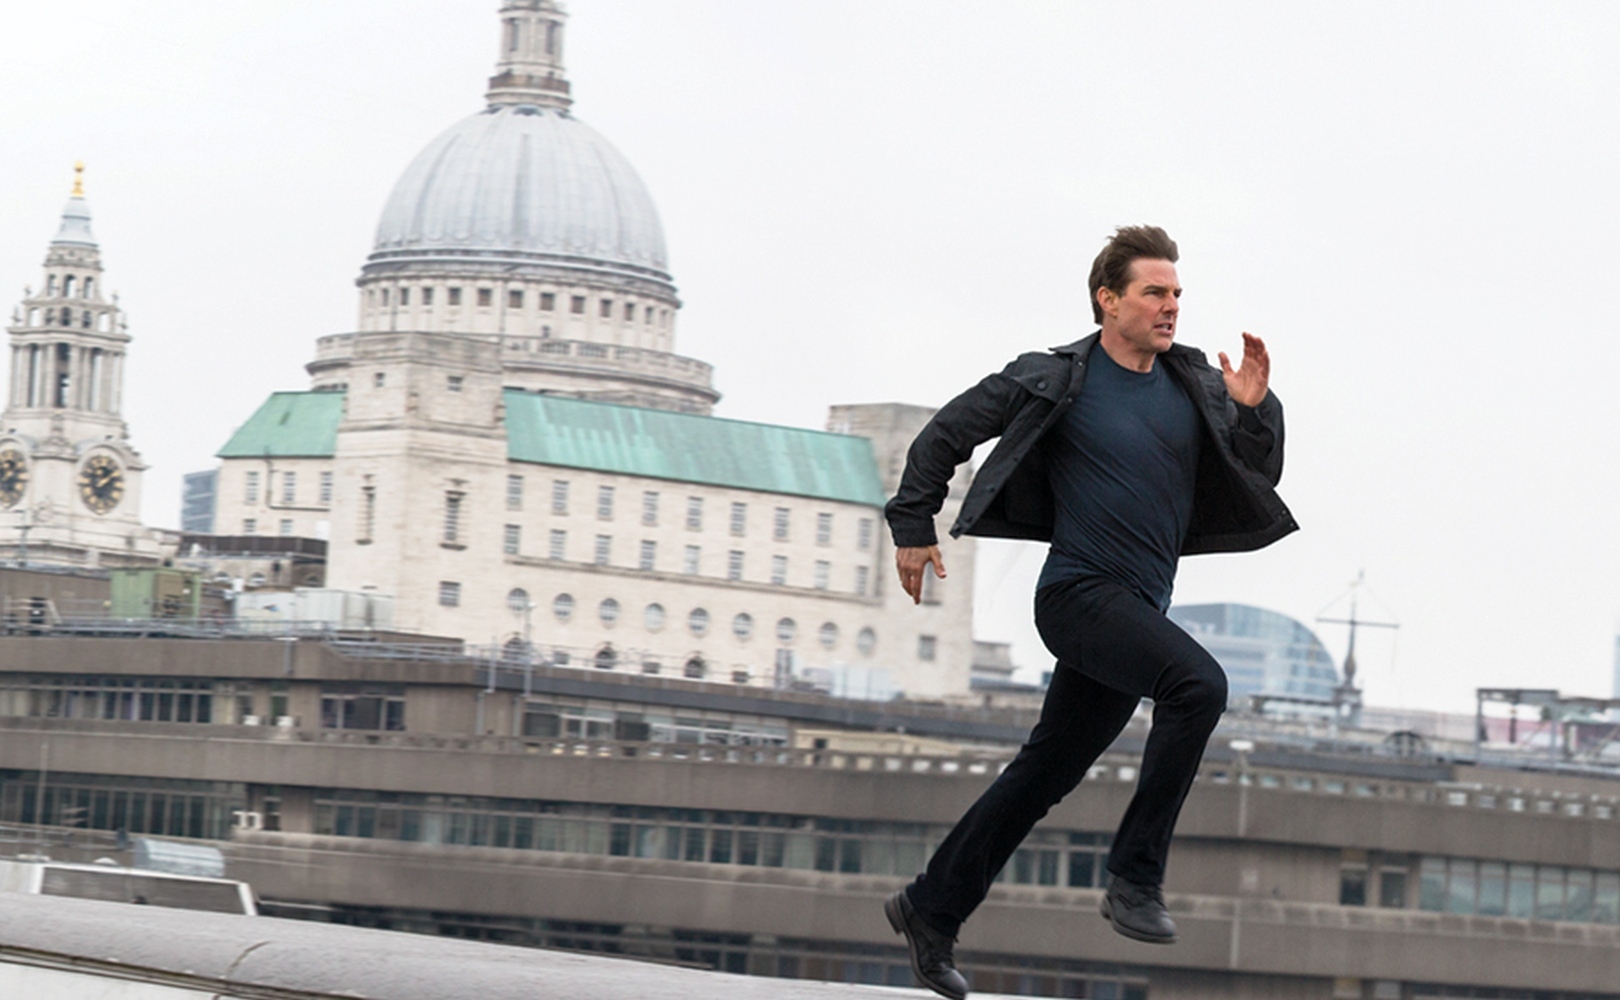 Mission: Impossible 7 is late again